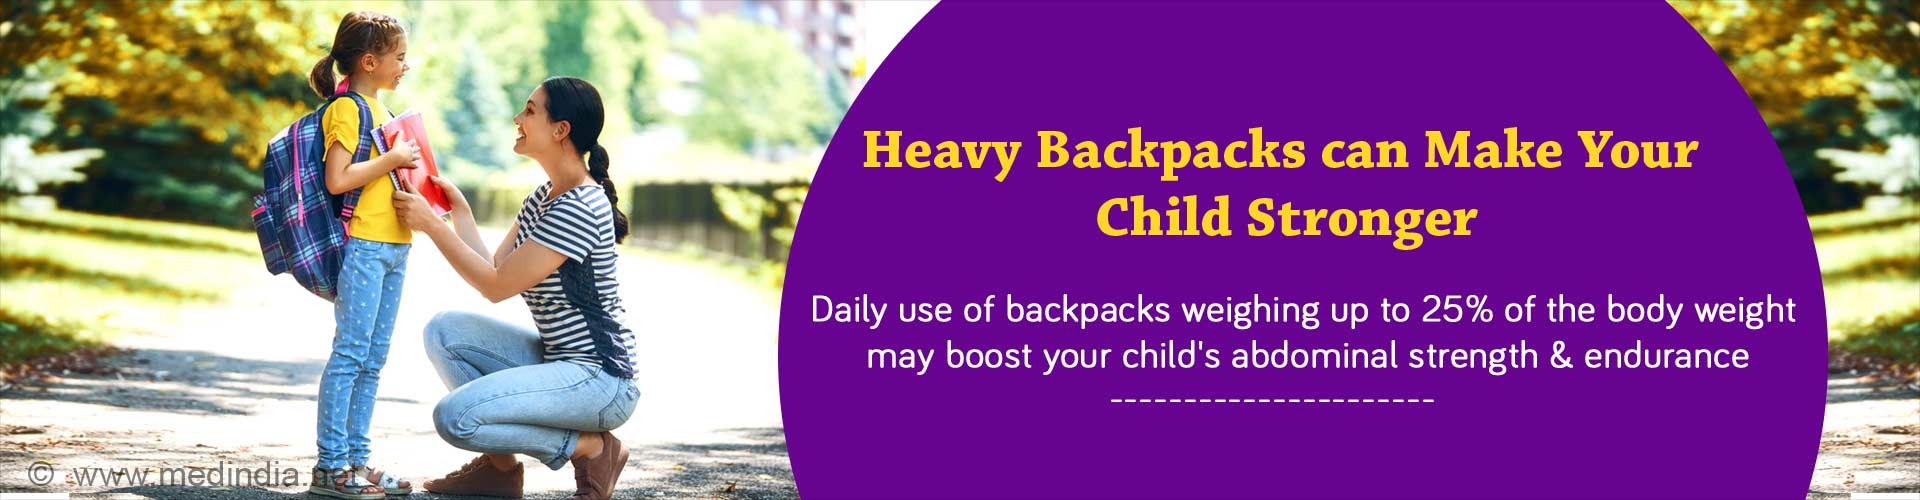 Heavy backpacks can make your child stronger. Daily use of backpacks weighing up to 25% of the body weight may boost your child's abdominal strength and endurance.